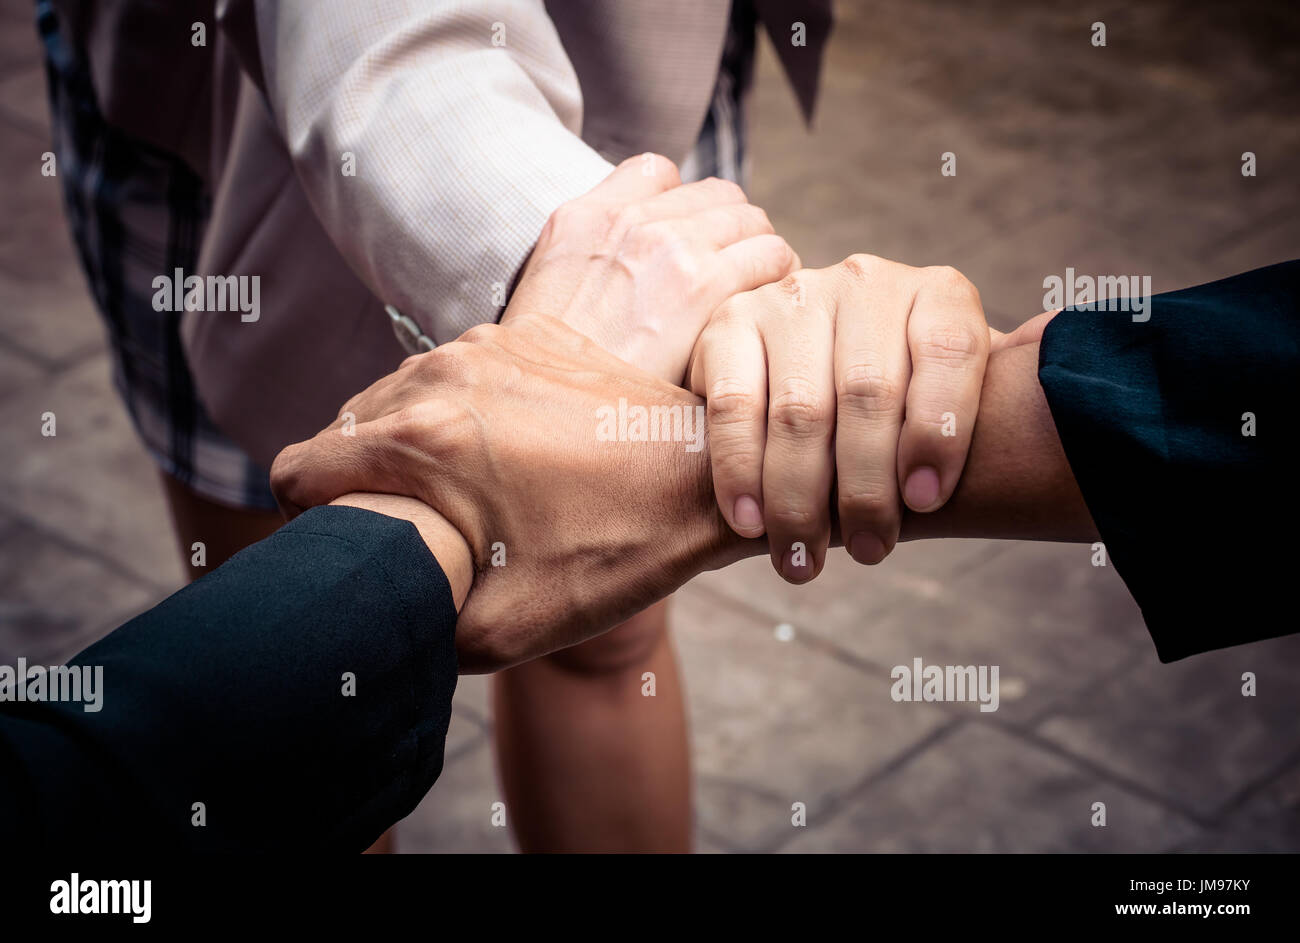 Teamwork Togetherness Collaboration Concept Stock Photo